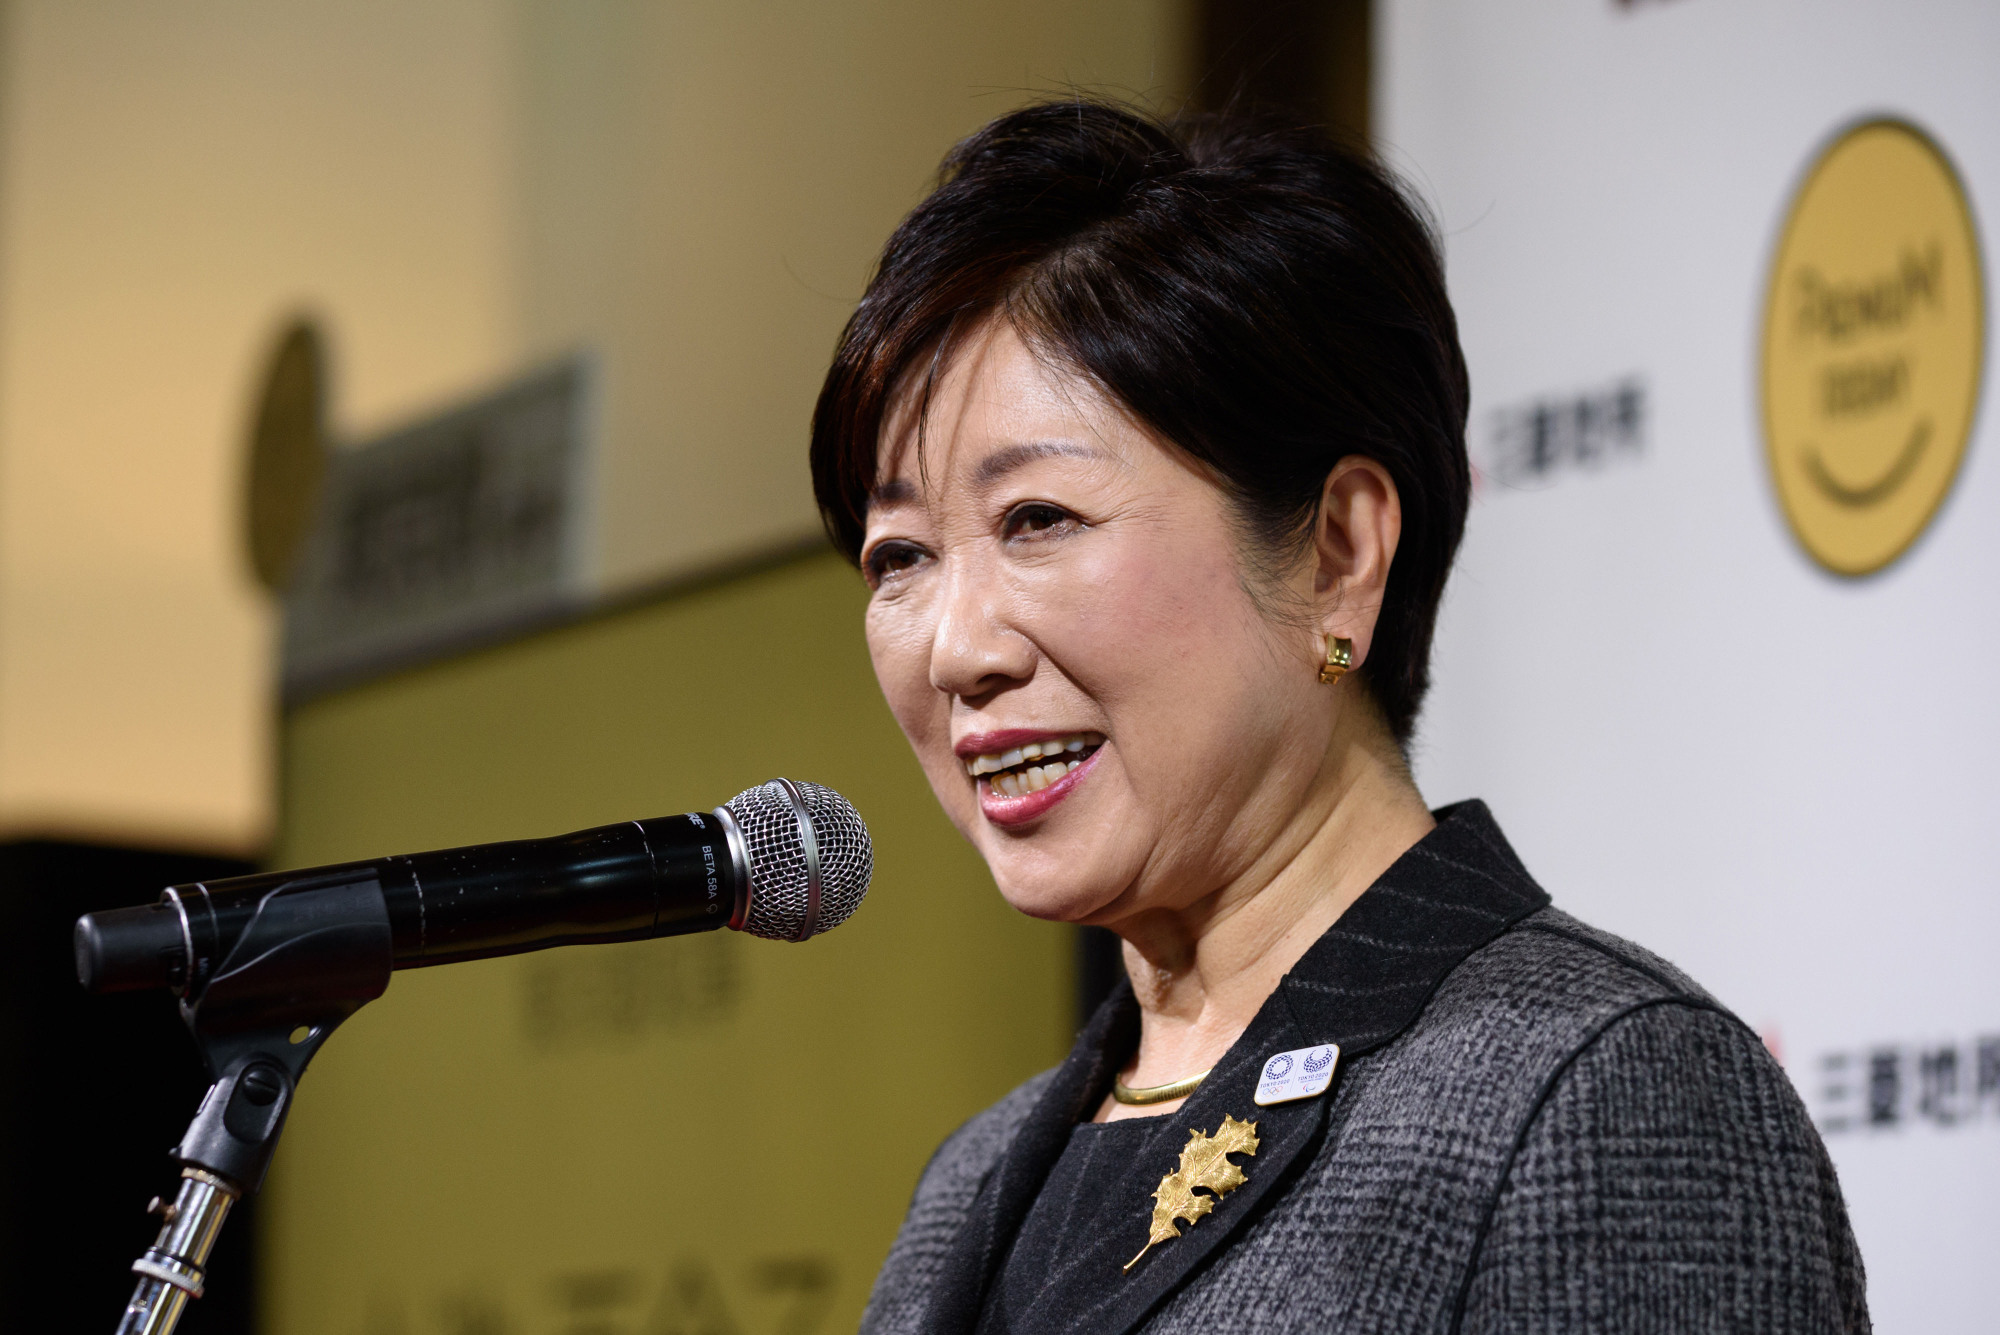 Tokyo Gov. Yuriko Koike's party Tomin First no Kai (Tokyoites First) played on the people's wish to see some change from the status quo that acts as a political straightjacket for too many critical issues, from security to privacy to the runaway costs of the 2020 Olympics. | BLOOMBERG